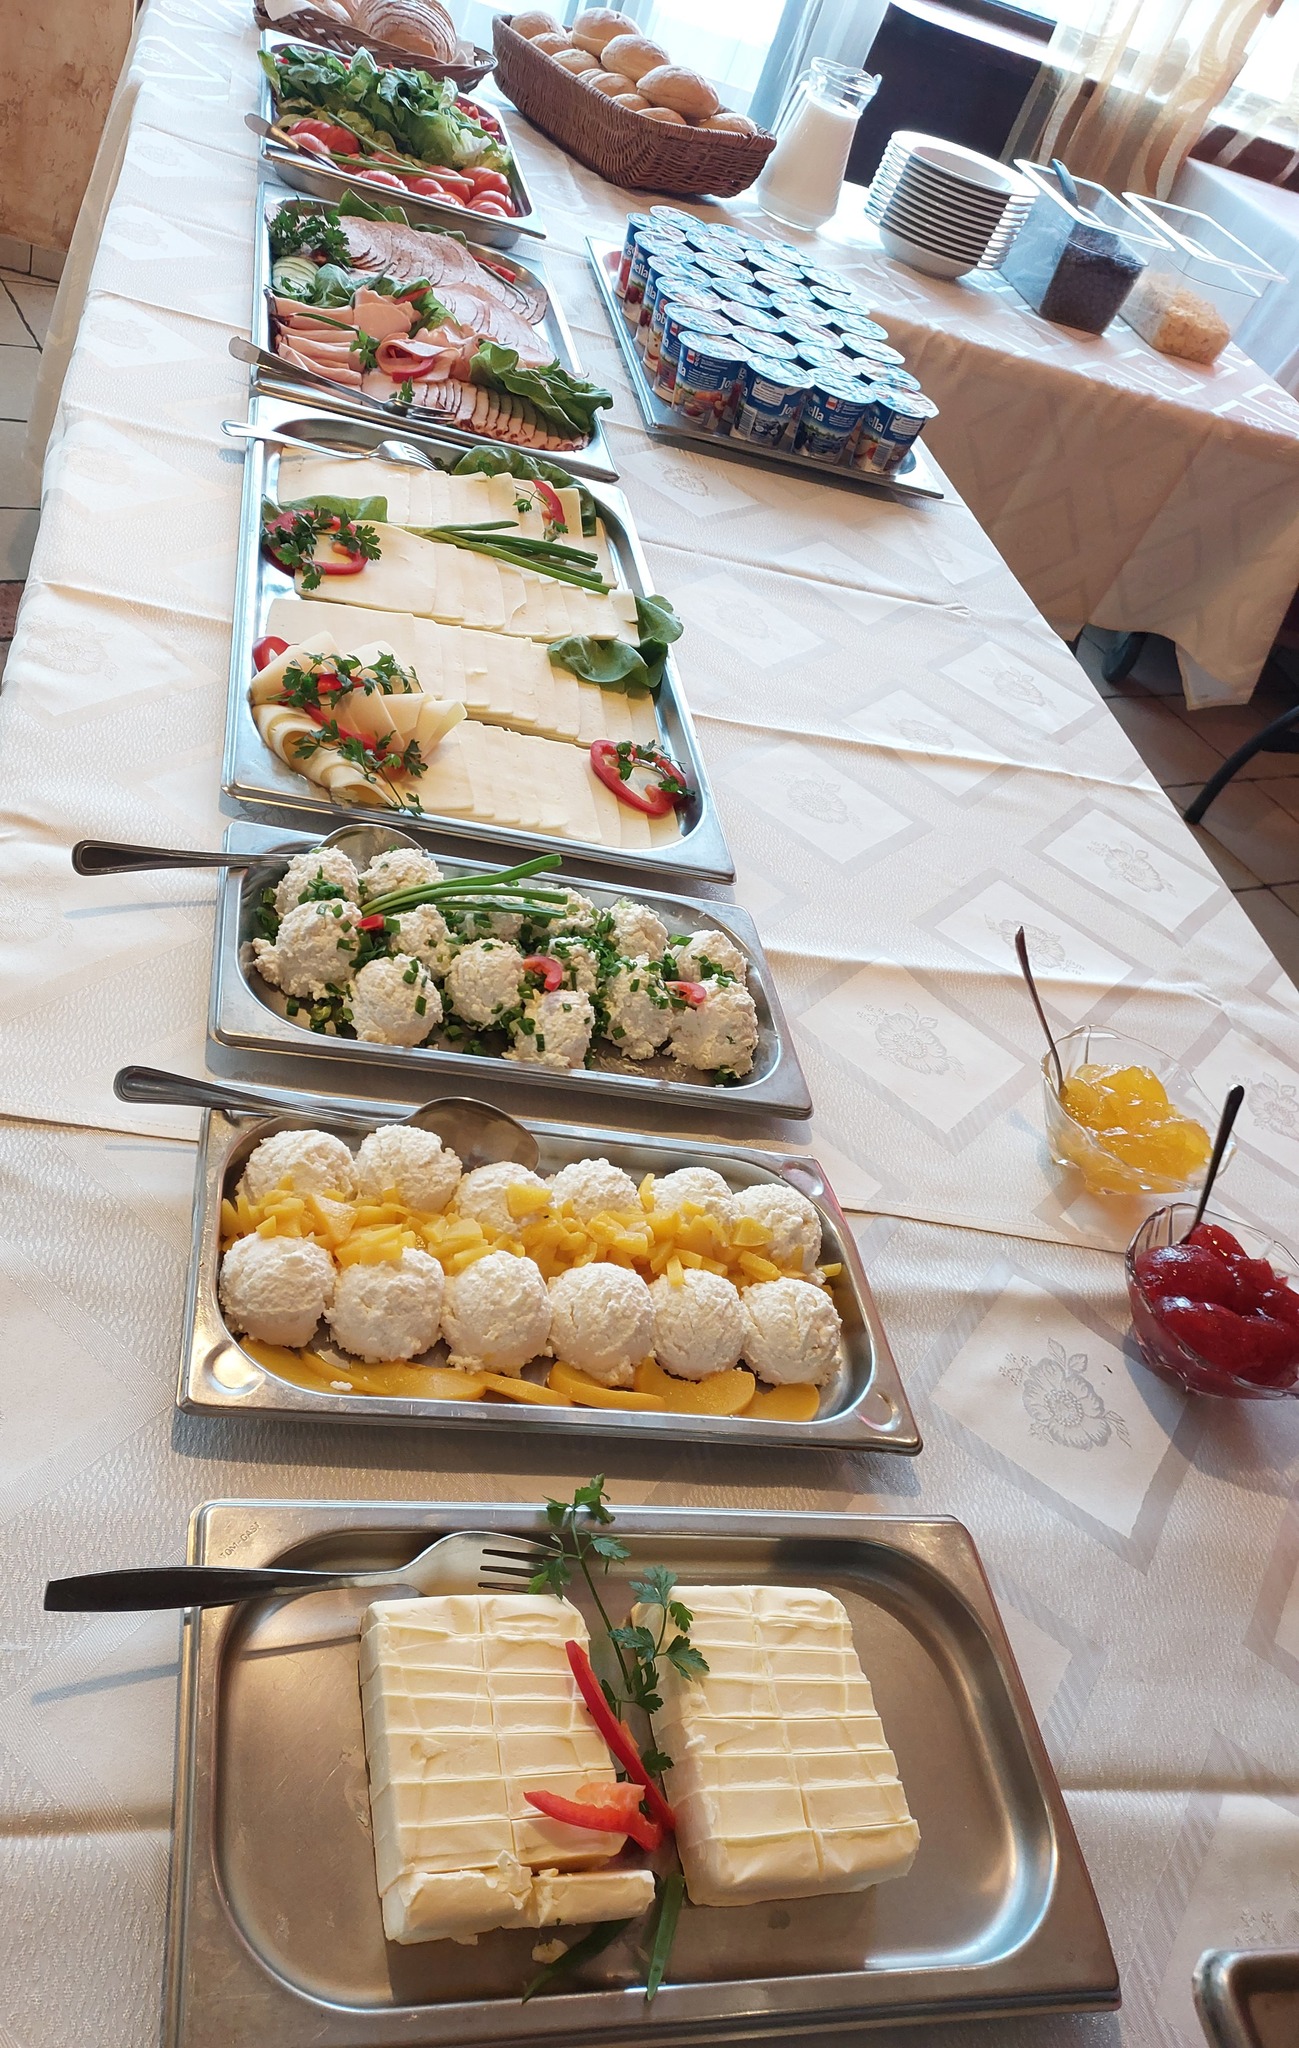 Breakfast buffet - cream cheese, cottage cheese with sweet and chives, cold cuts, tomatoes, peppers, bread, butter, yogurt, jams, cereals with milk.